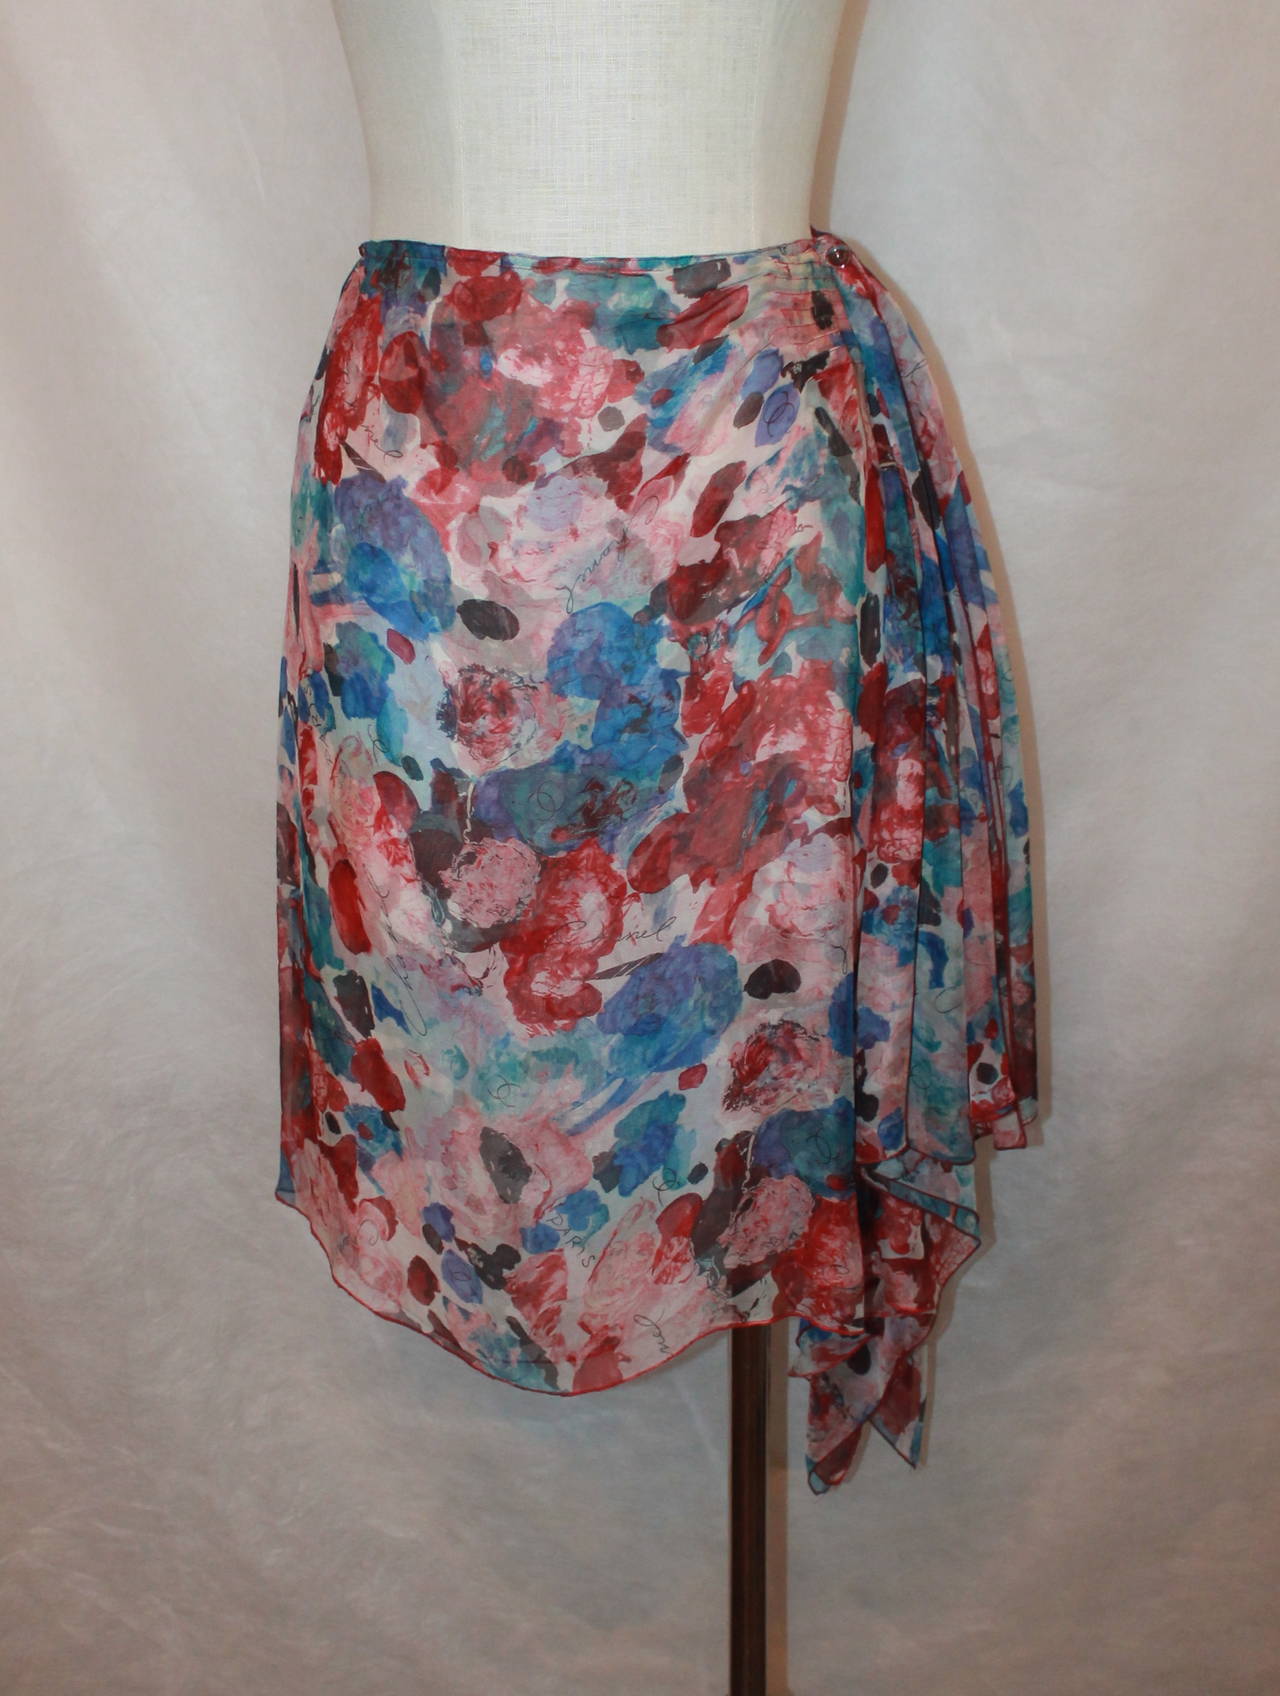 Chanel 2000's Multi-Color Floral & Chanel Printed Silk Chiffon Skirt - 38. This skirt is in excellent condition and is lined. The skirt has a gathering on the right side that hangs below the length of the skirt. 

Measurements:
Waist- 26